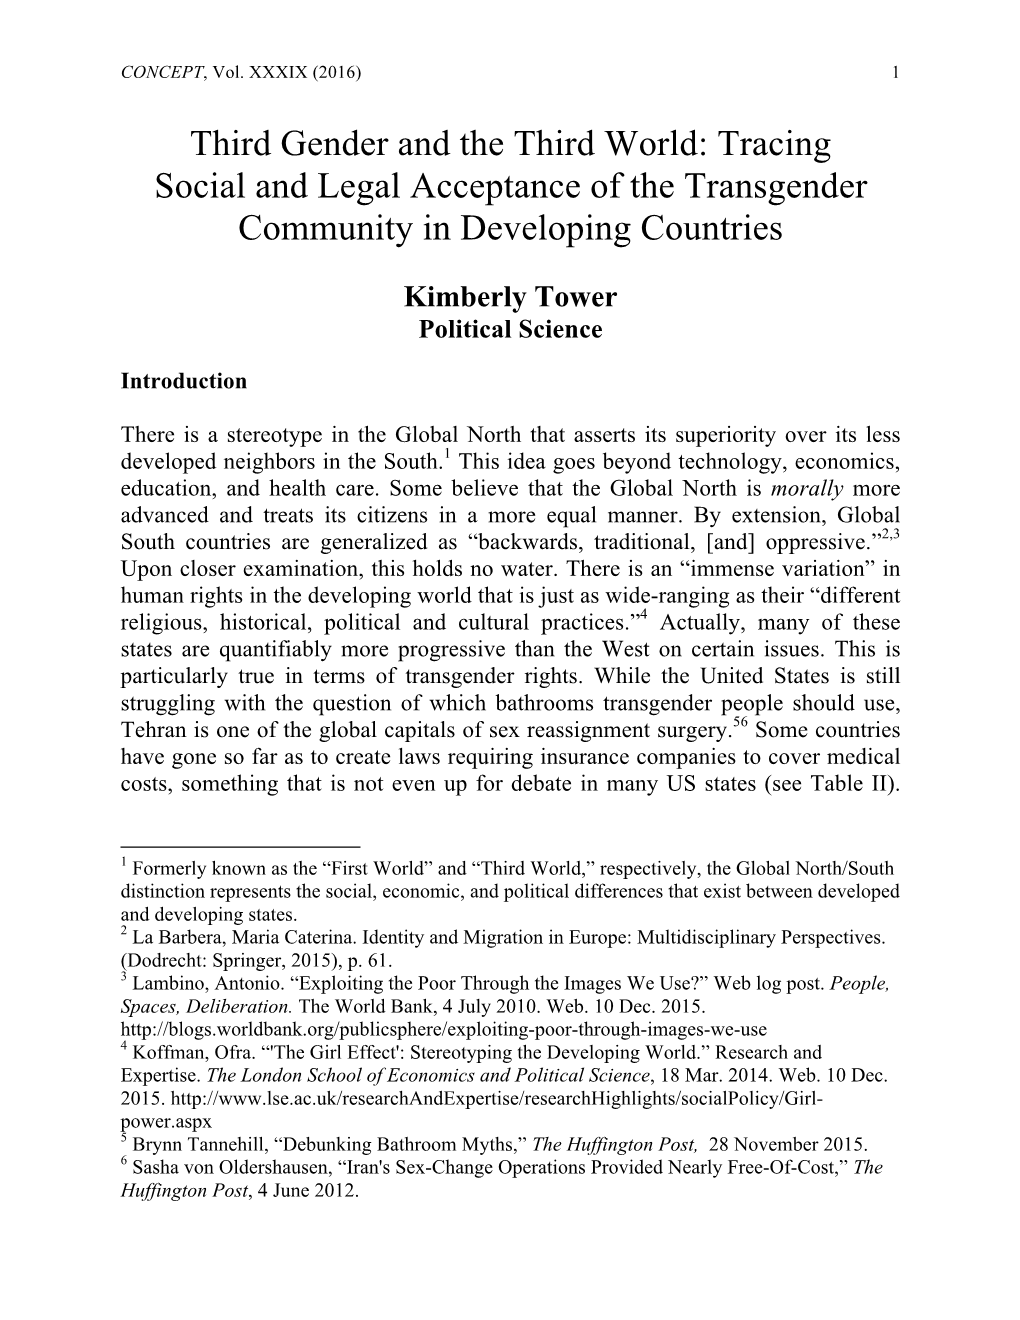 Tracing Social and Legal Acceptance of the Transgender Community in Developing Countries